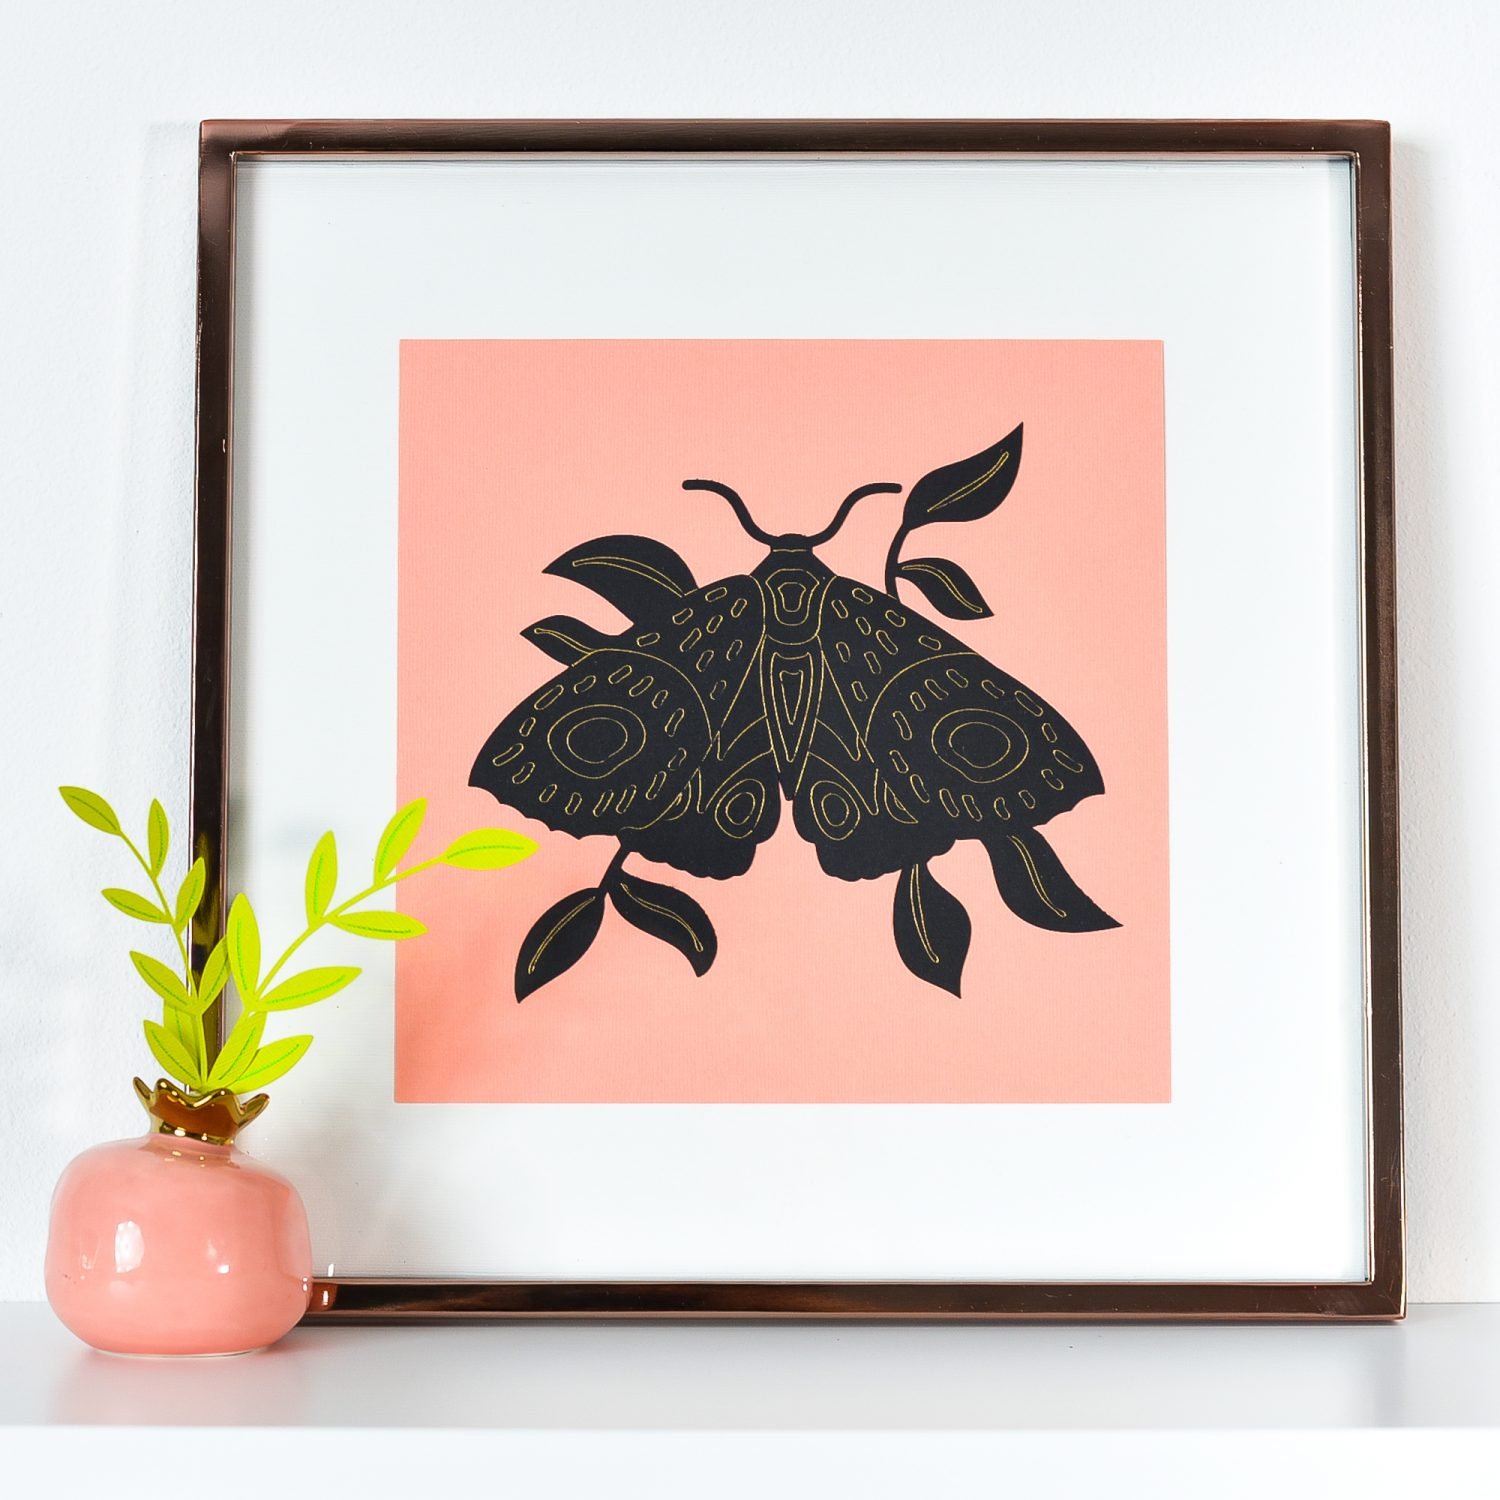 Foiled Moth Cricut Artwork: Black moth with gold foiling on pink background in frame with small paper plant.